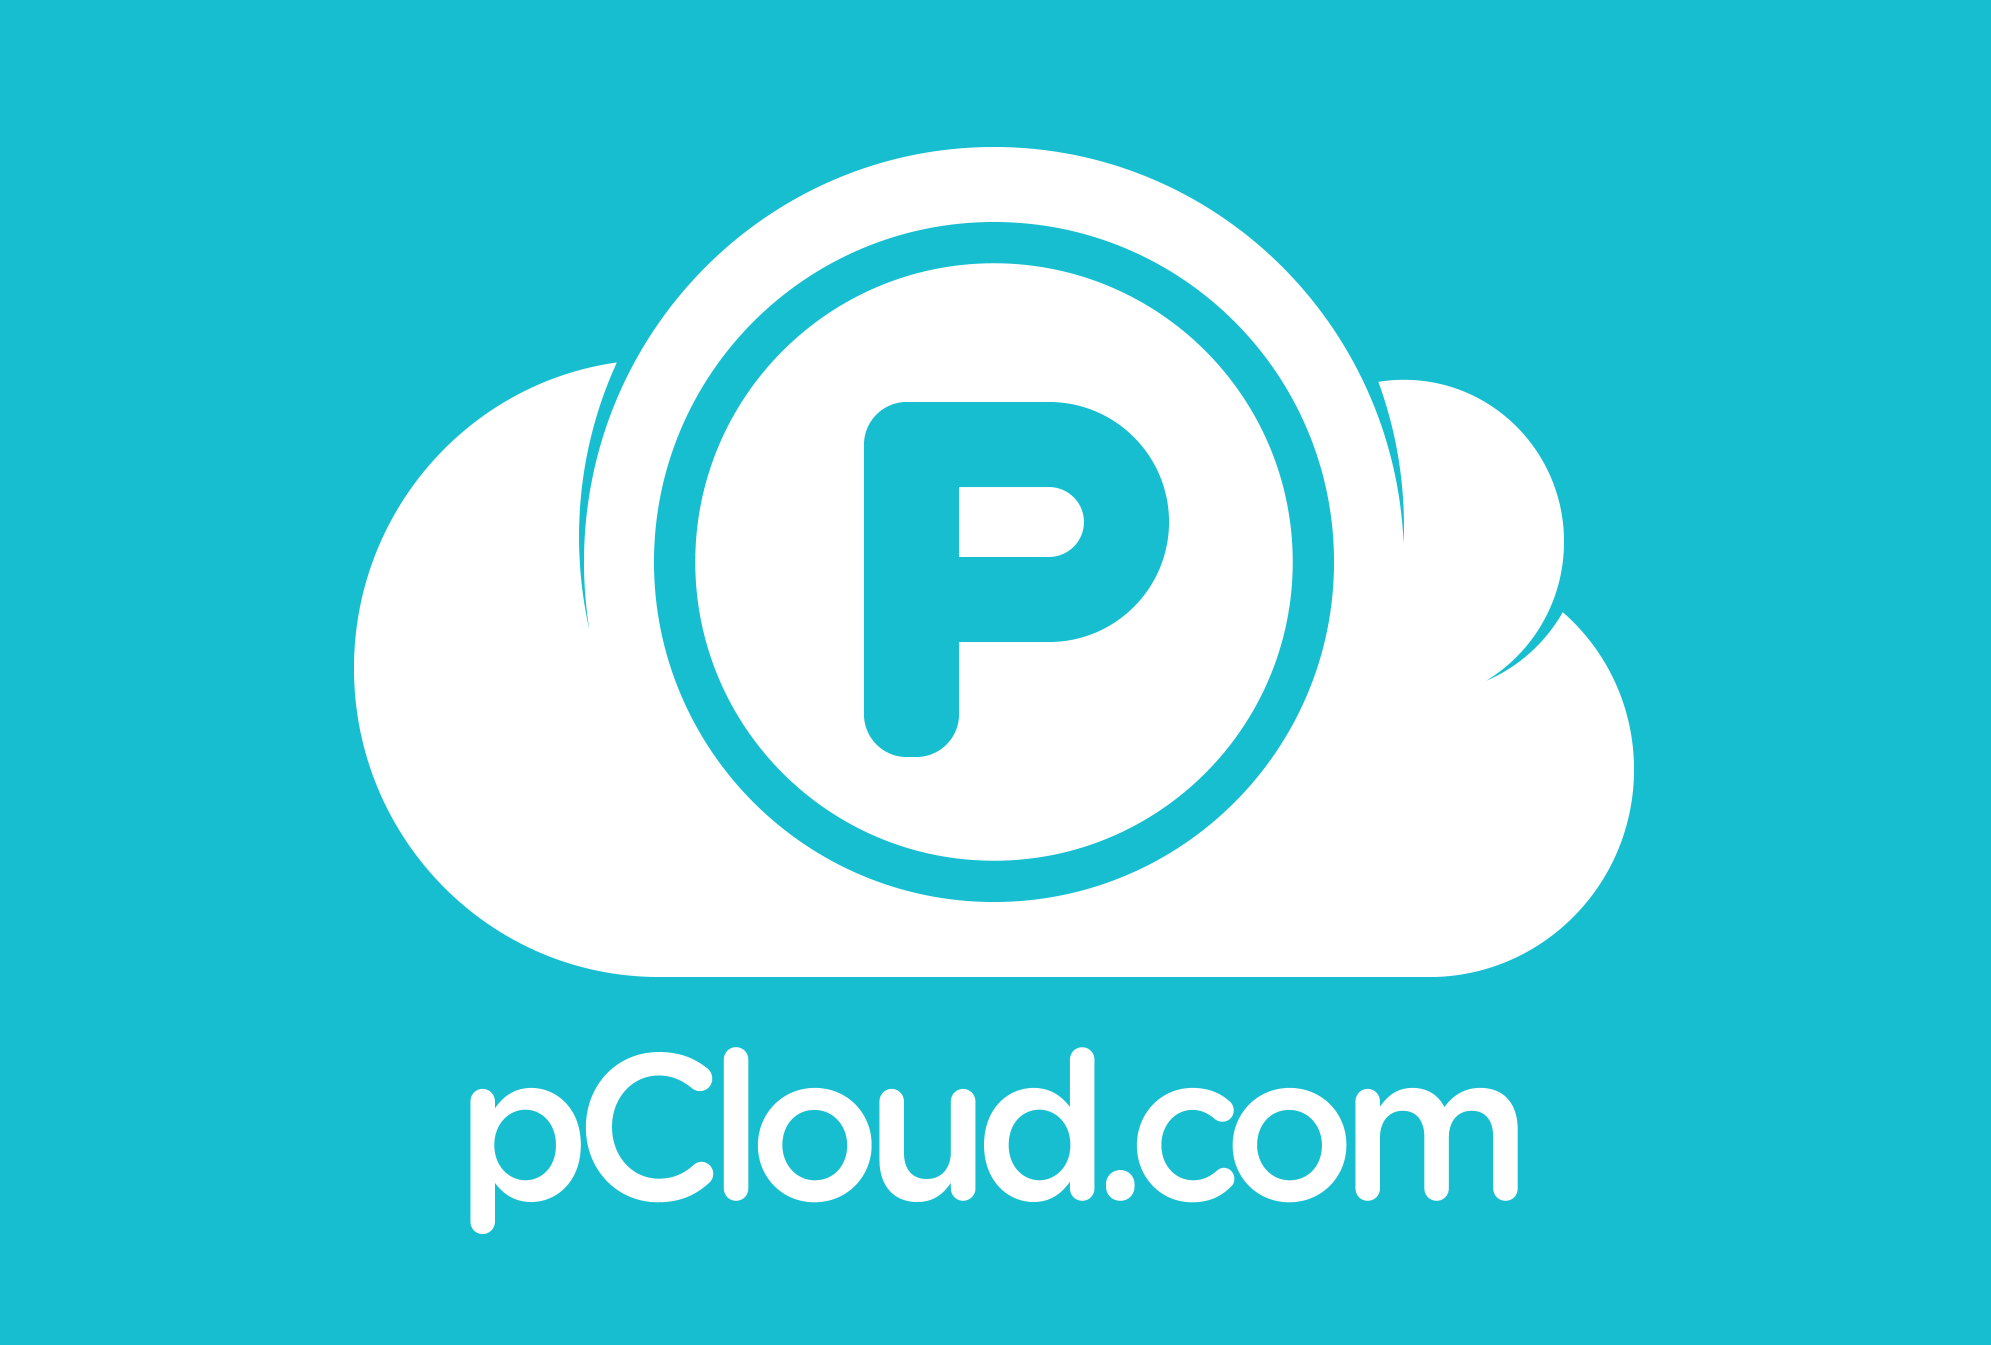 pcloud free account